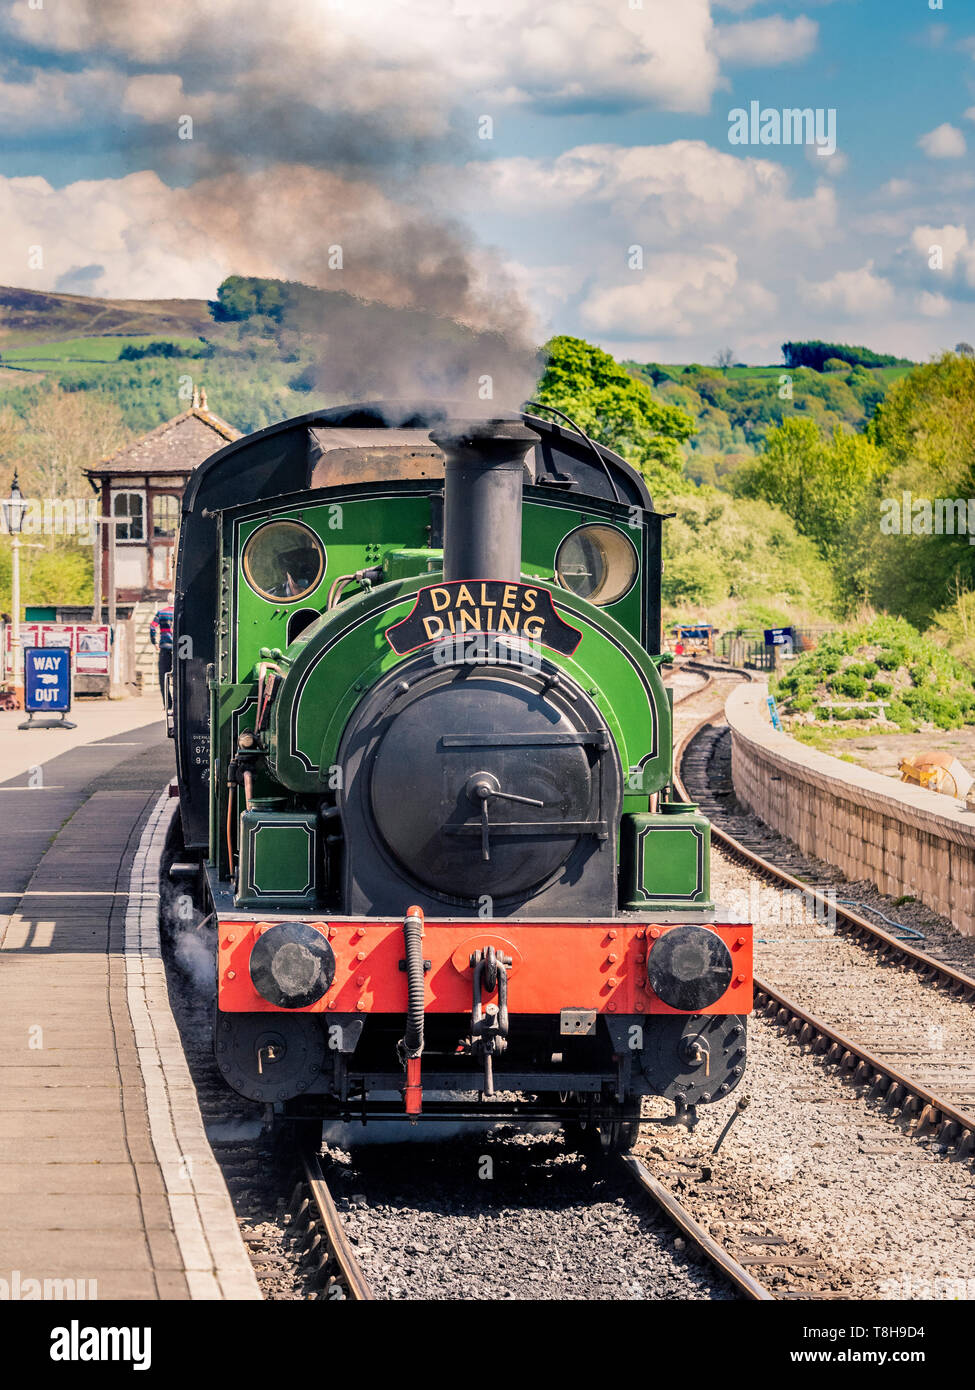 Sir Robert Alpine and Sons, Engine No. 88. Embsay and Bolton steam railway. Bolton Station, Yorkshire Dales, UK. Stock Photo